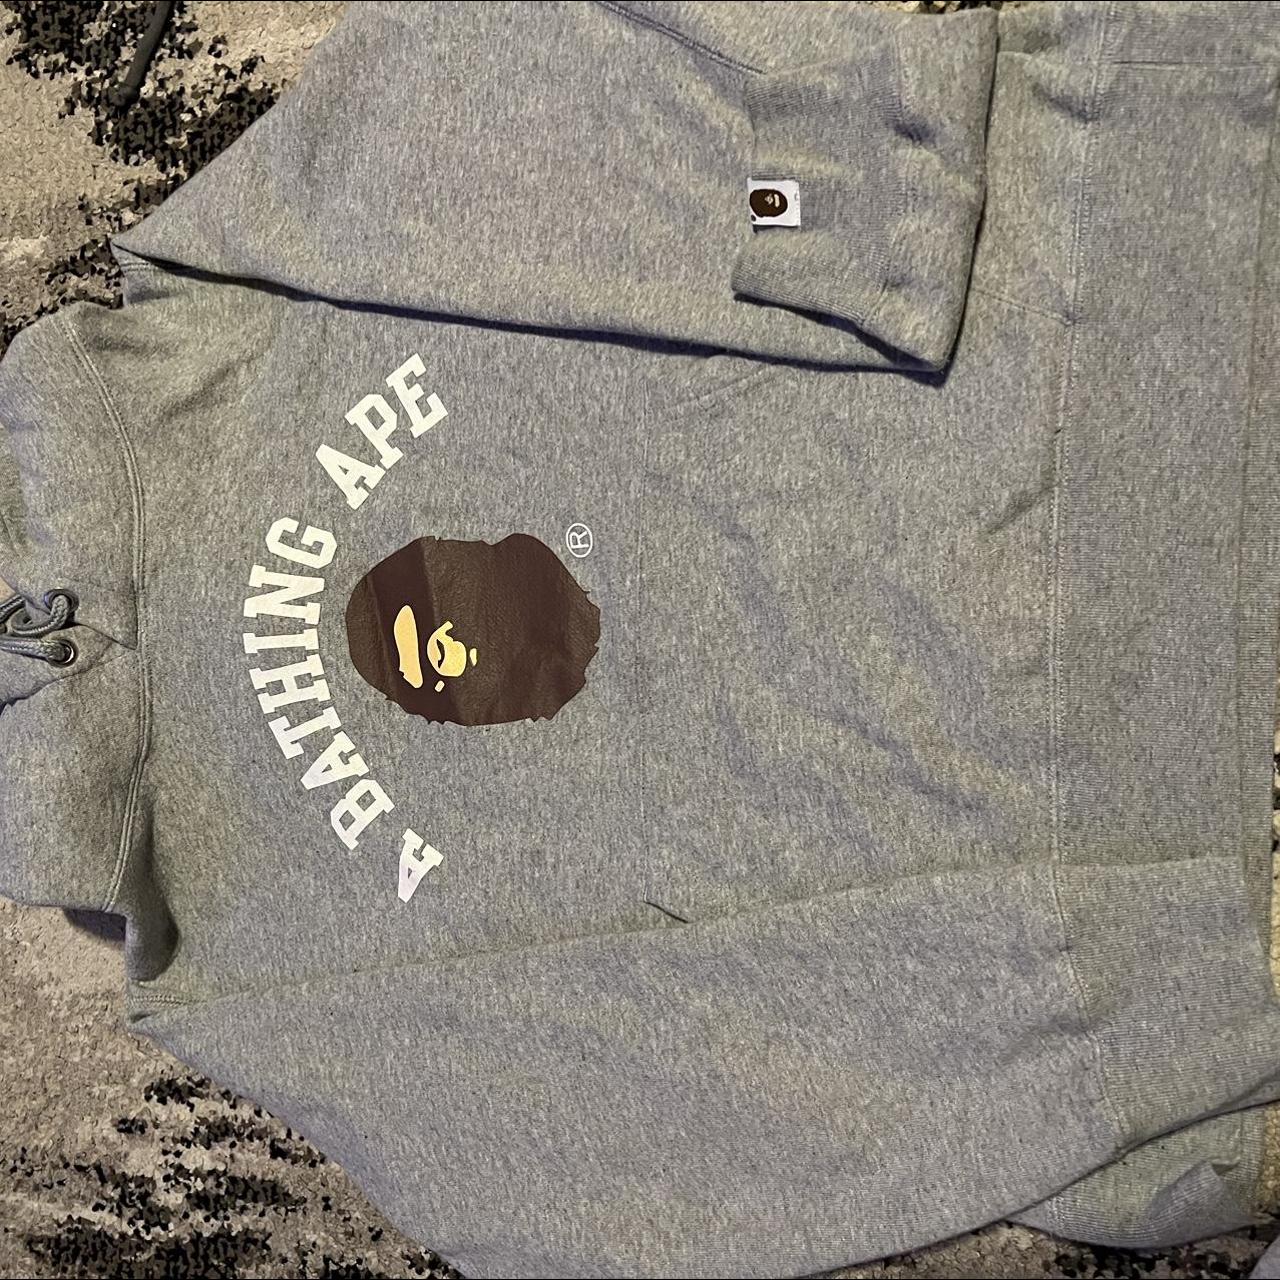 anybody know what bape hoodie this is? : r/Bape